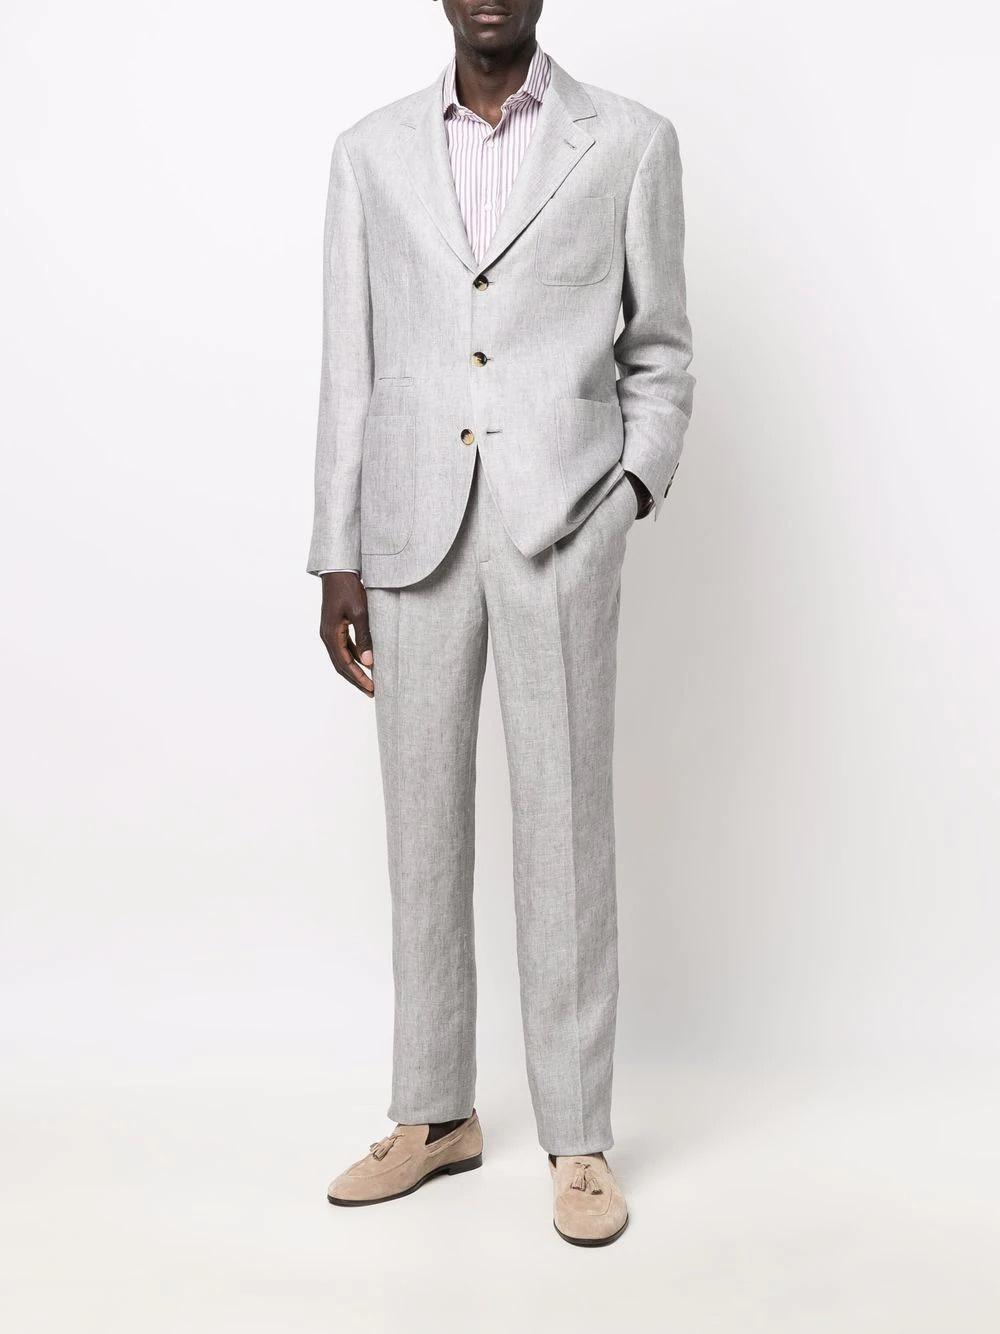 21 Best Summer Wedding Suits to Keep You Looking and Feeling Cool ...